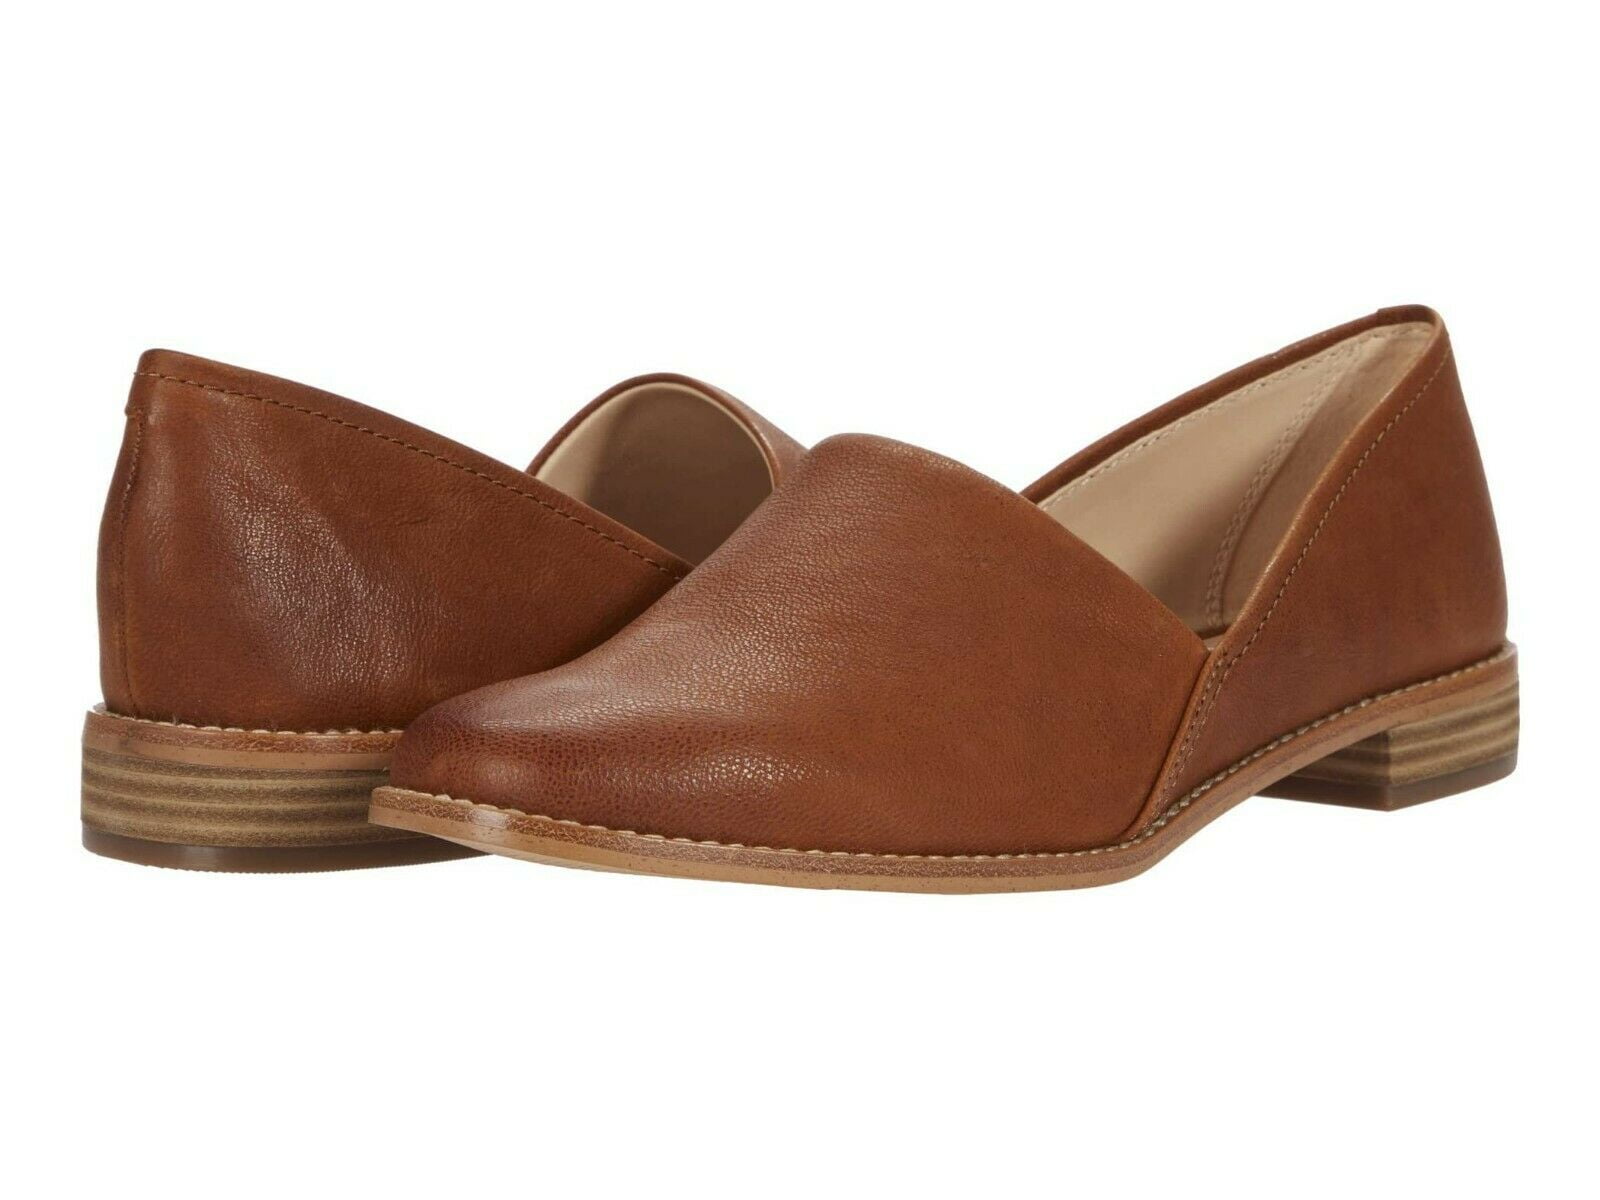 Clarks Pure Leather Slip On Loafers 57397 - Walmart.com